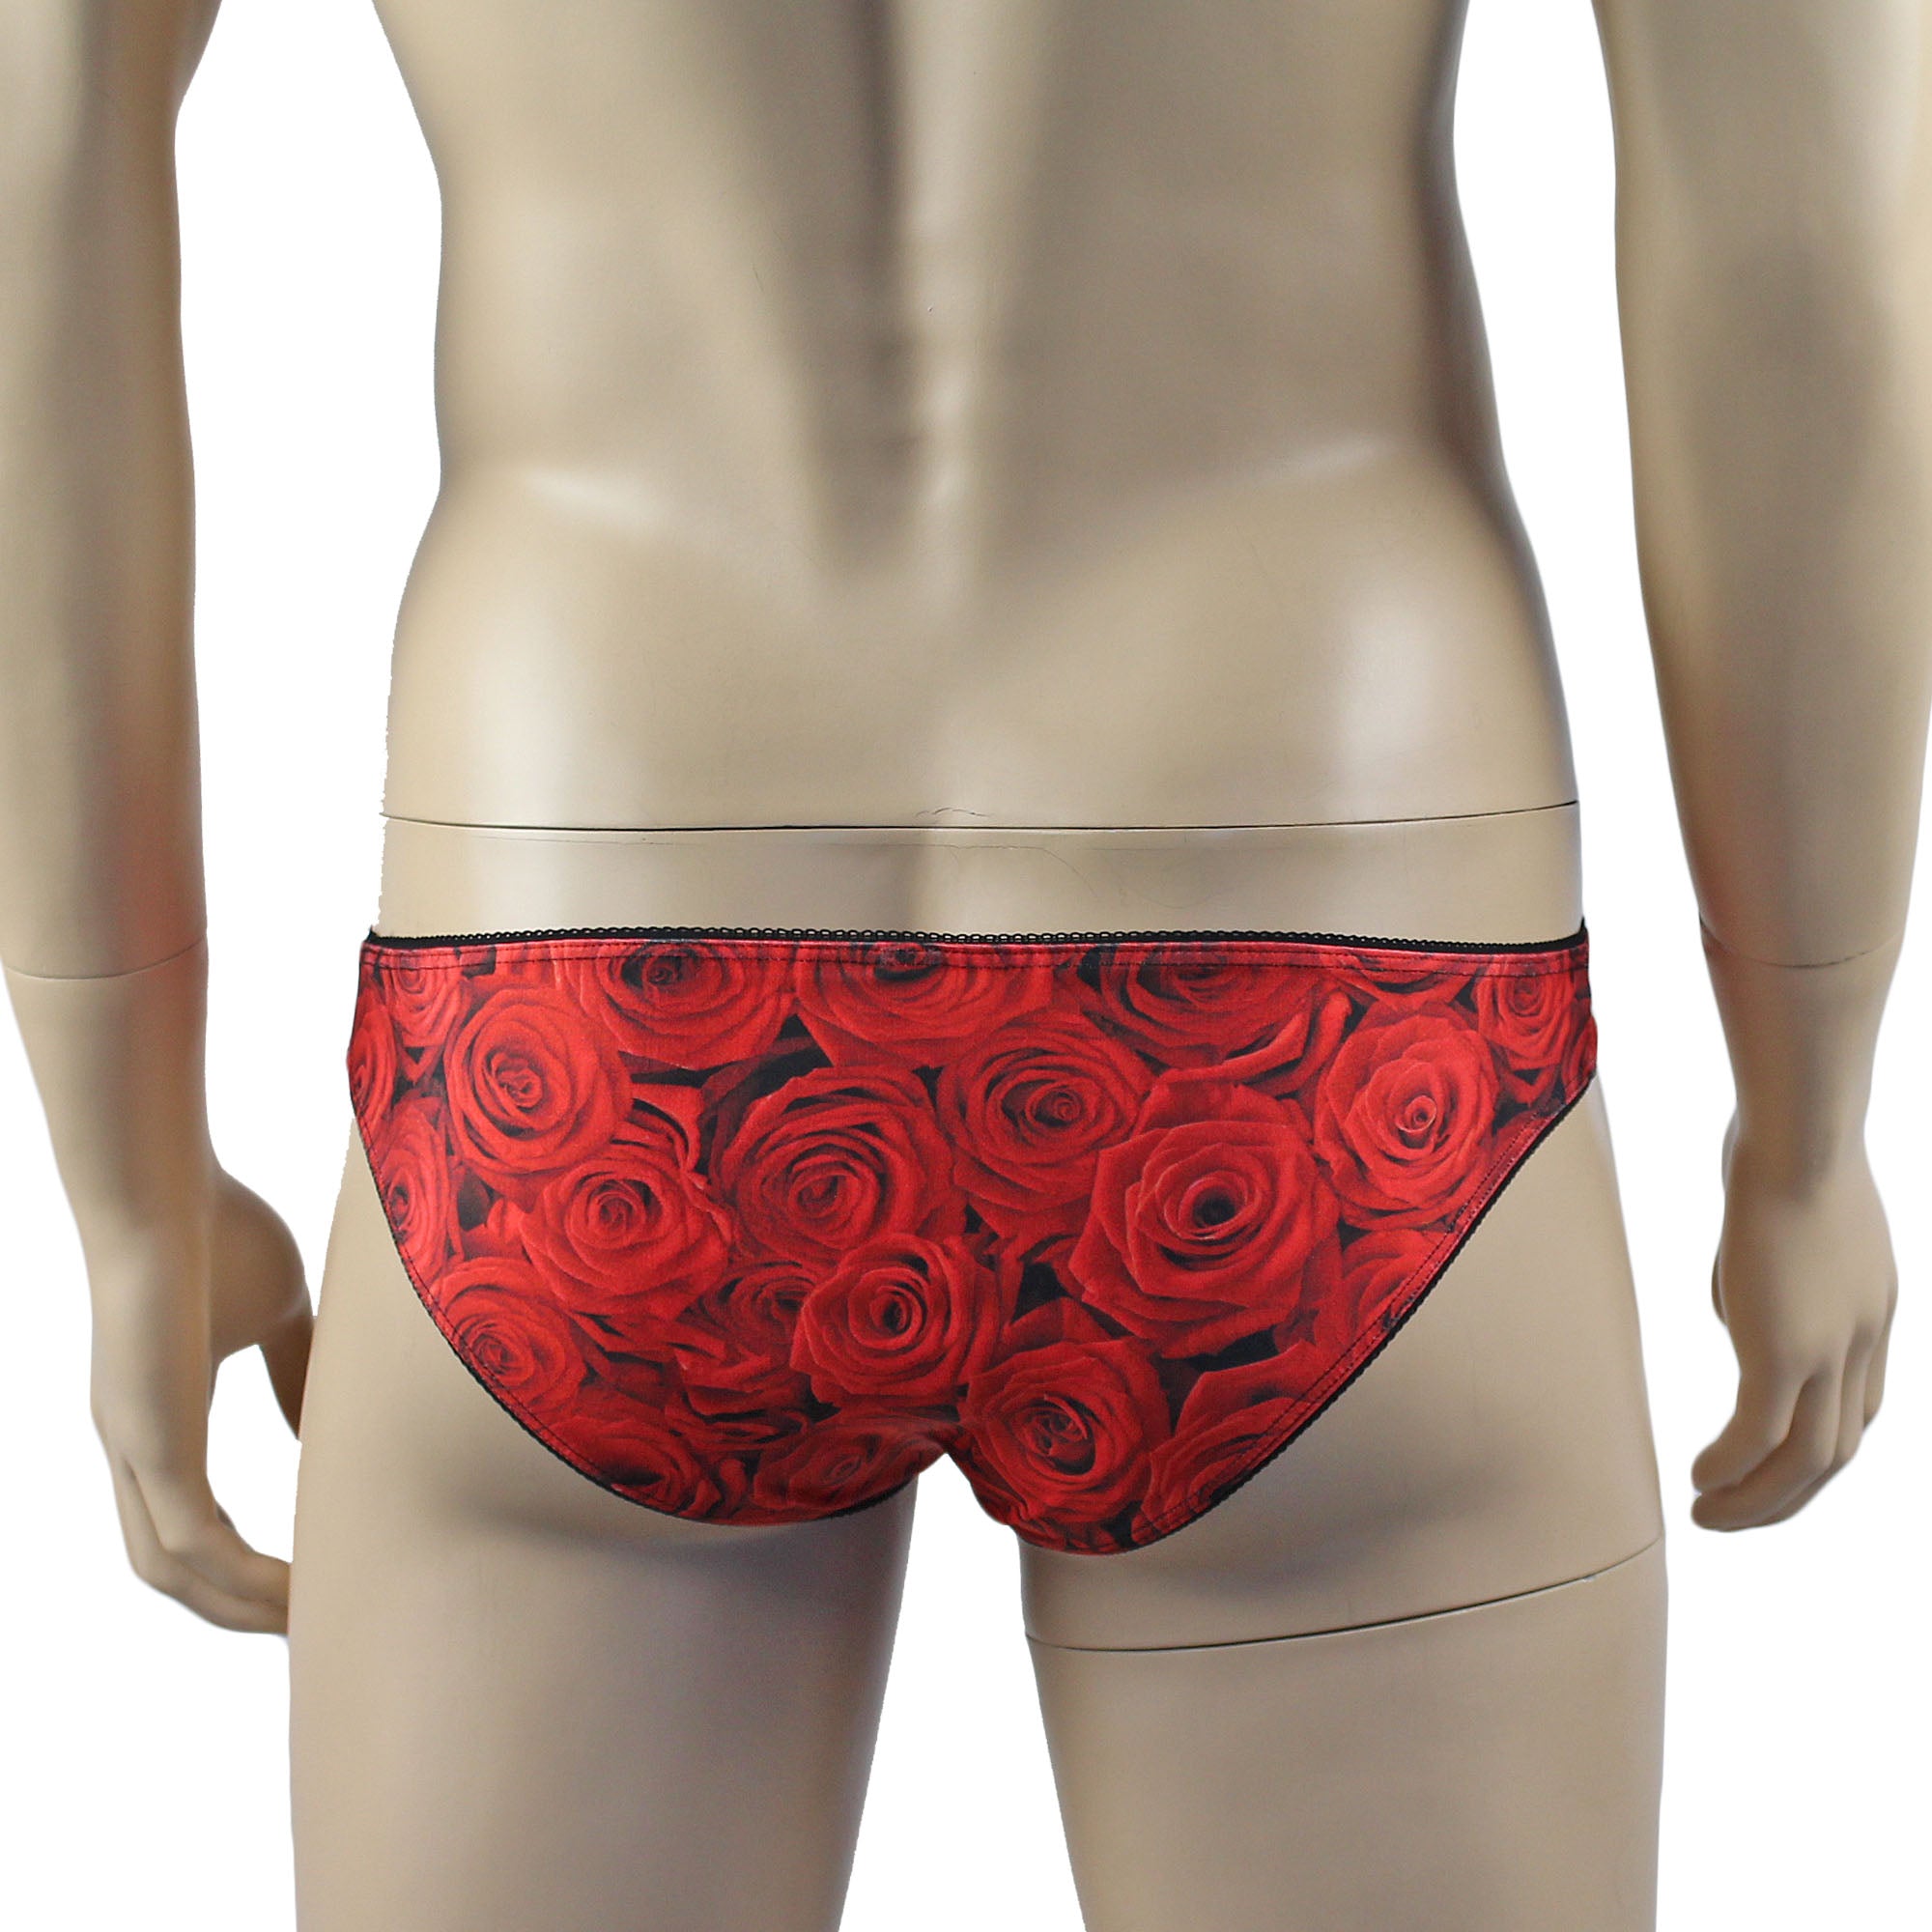 Mens Roses Stretch Spandex Panty Brief with Decorative Pico Elastic Red